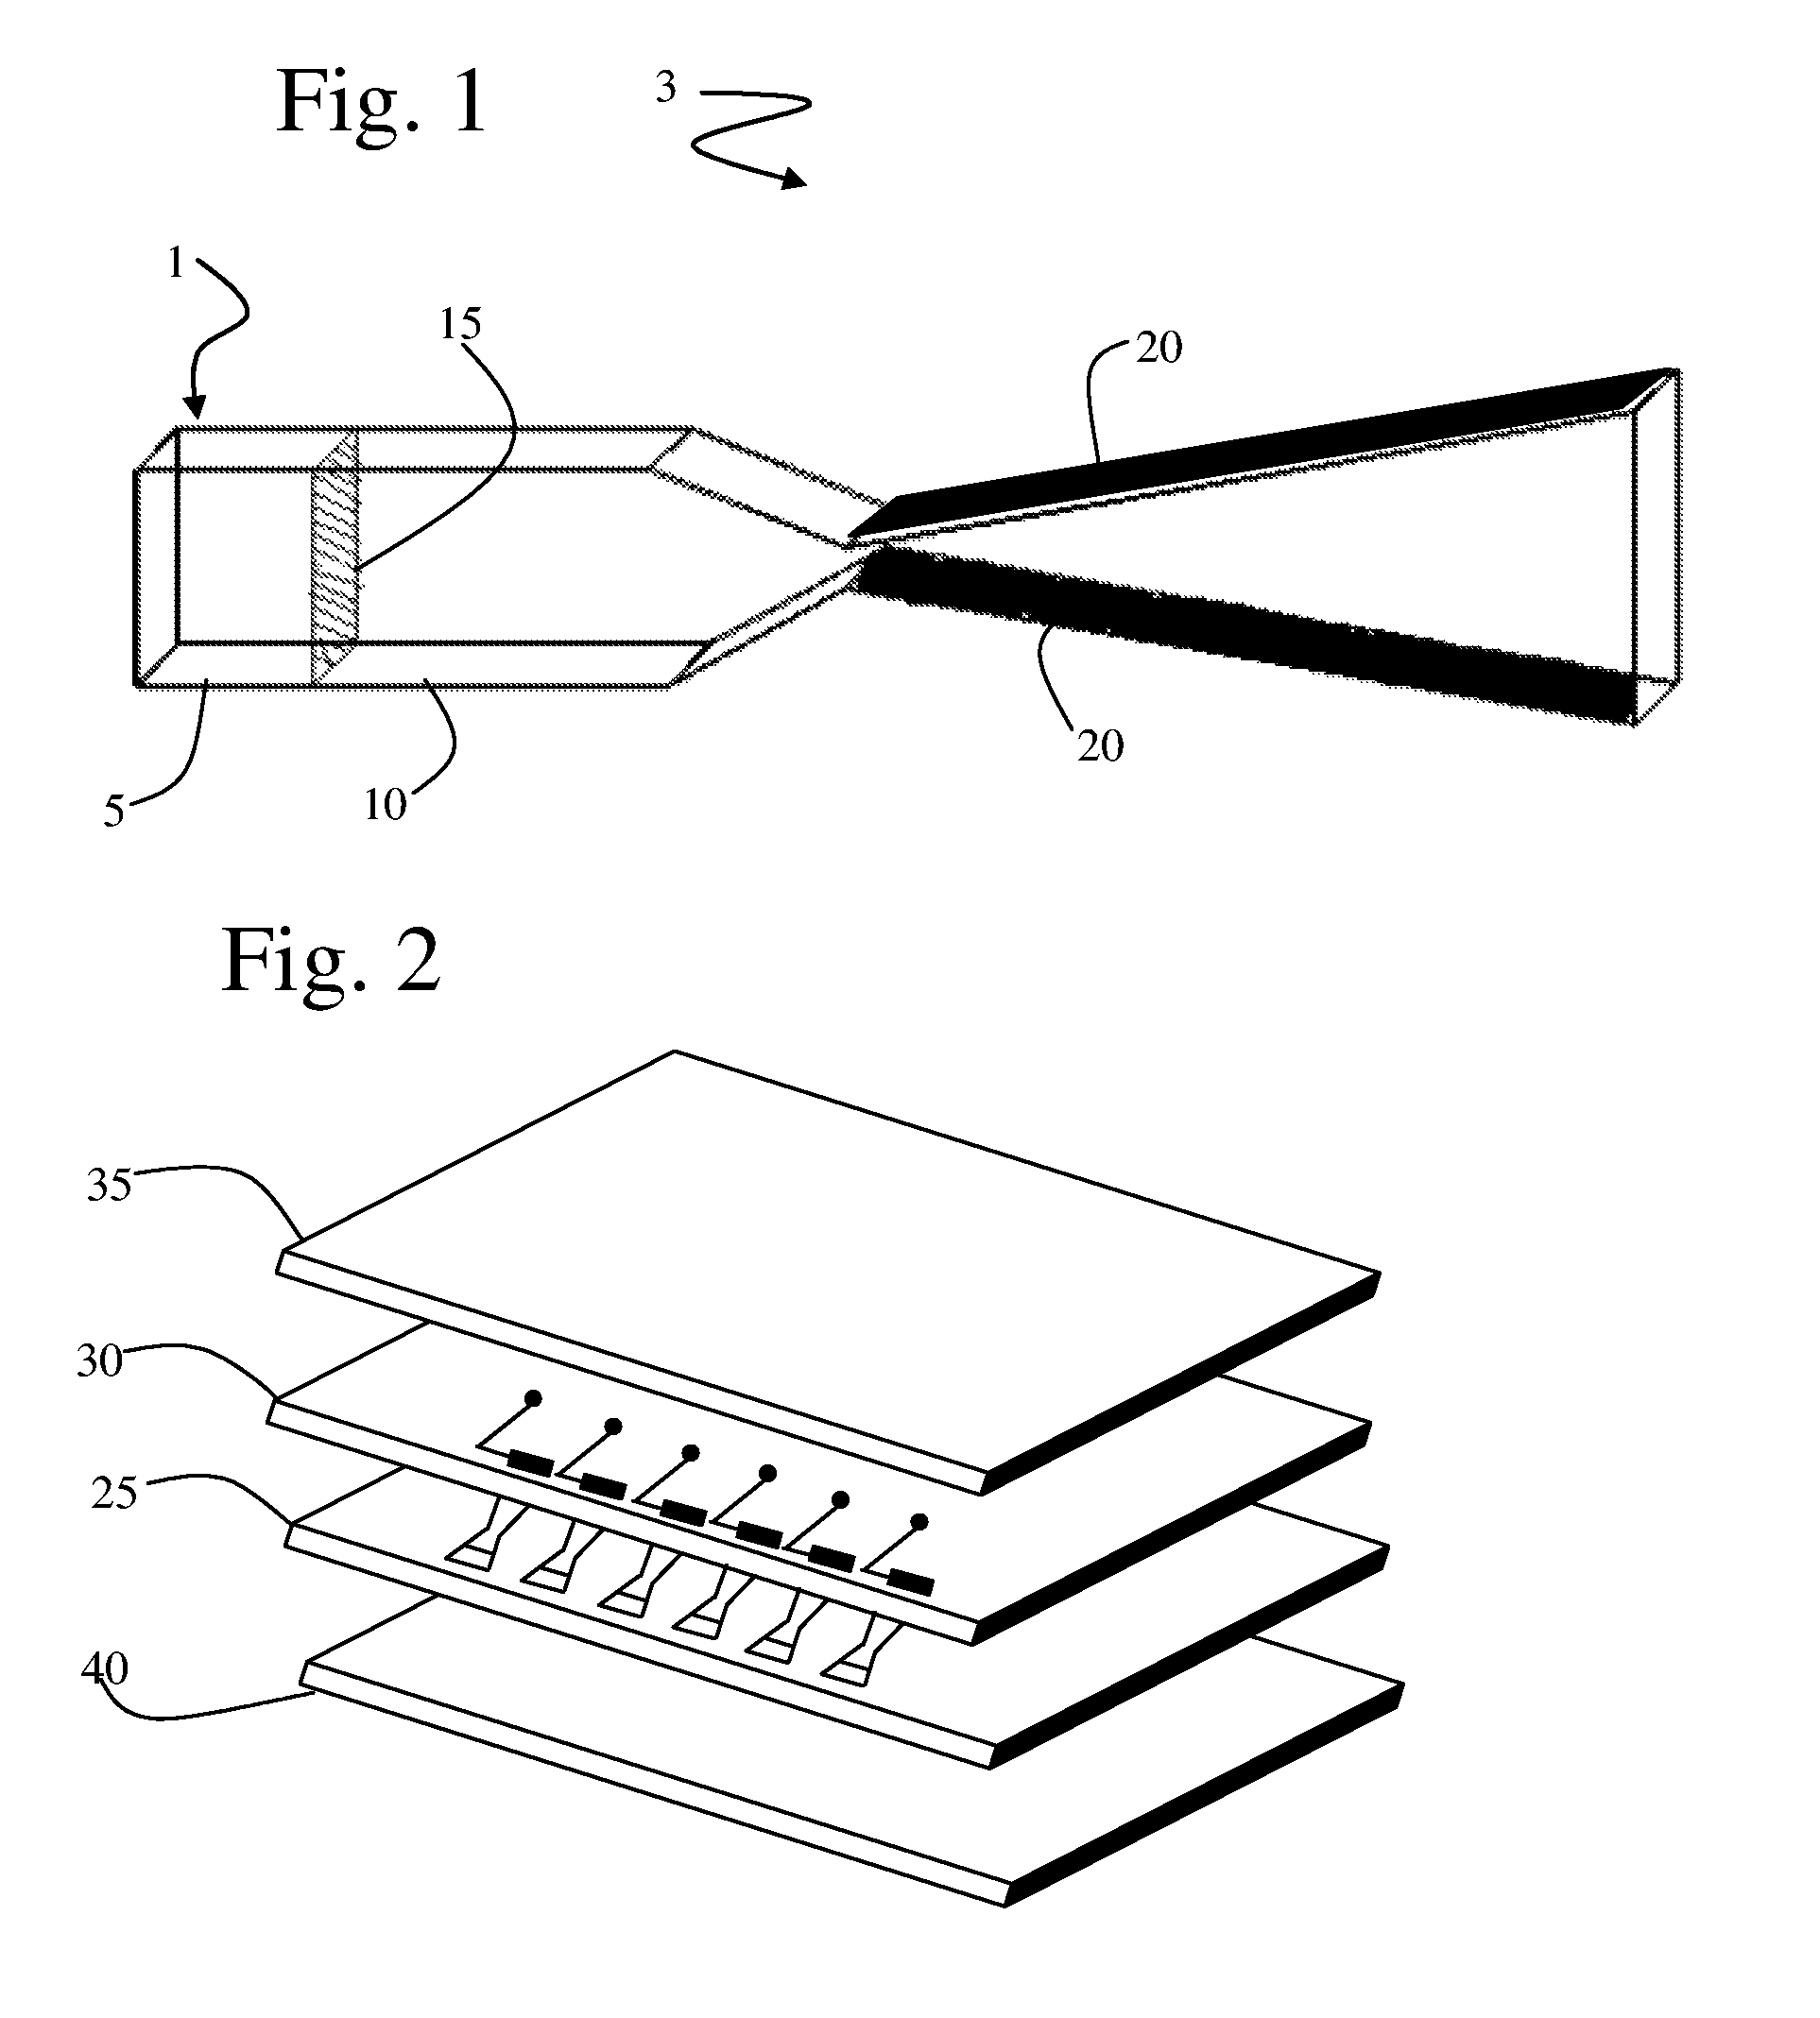 MEMS microgenerator cell and microgenerator cell array